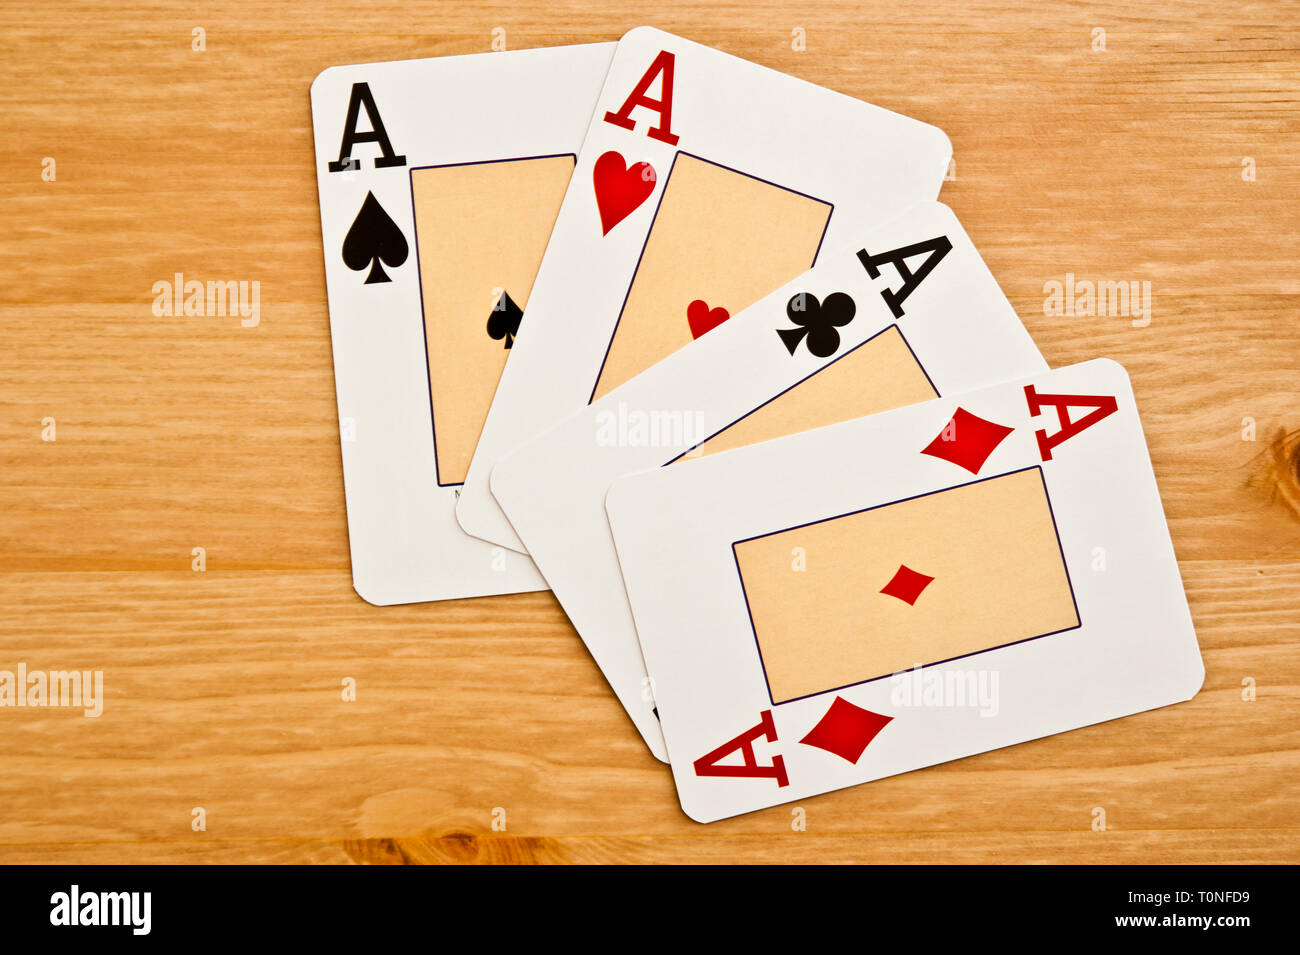 four aces poker playing cards Stock Photo